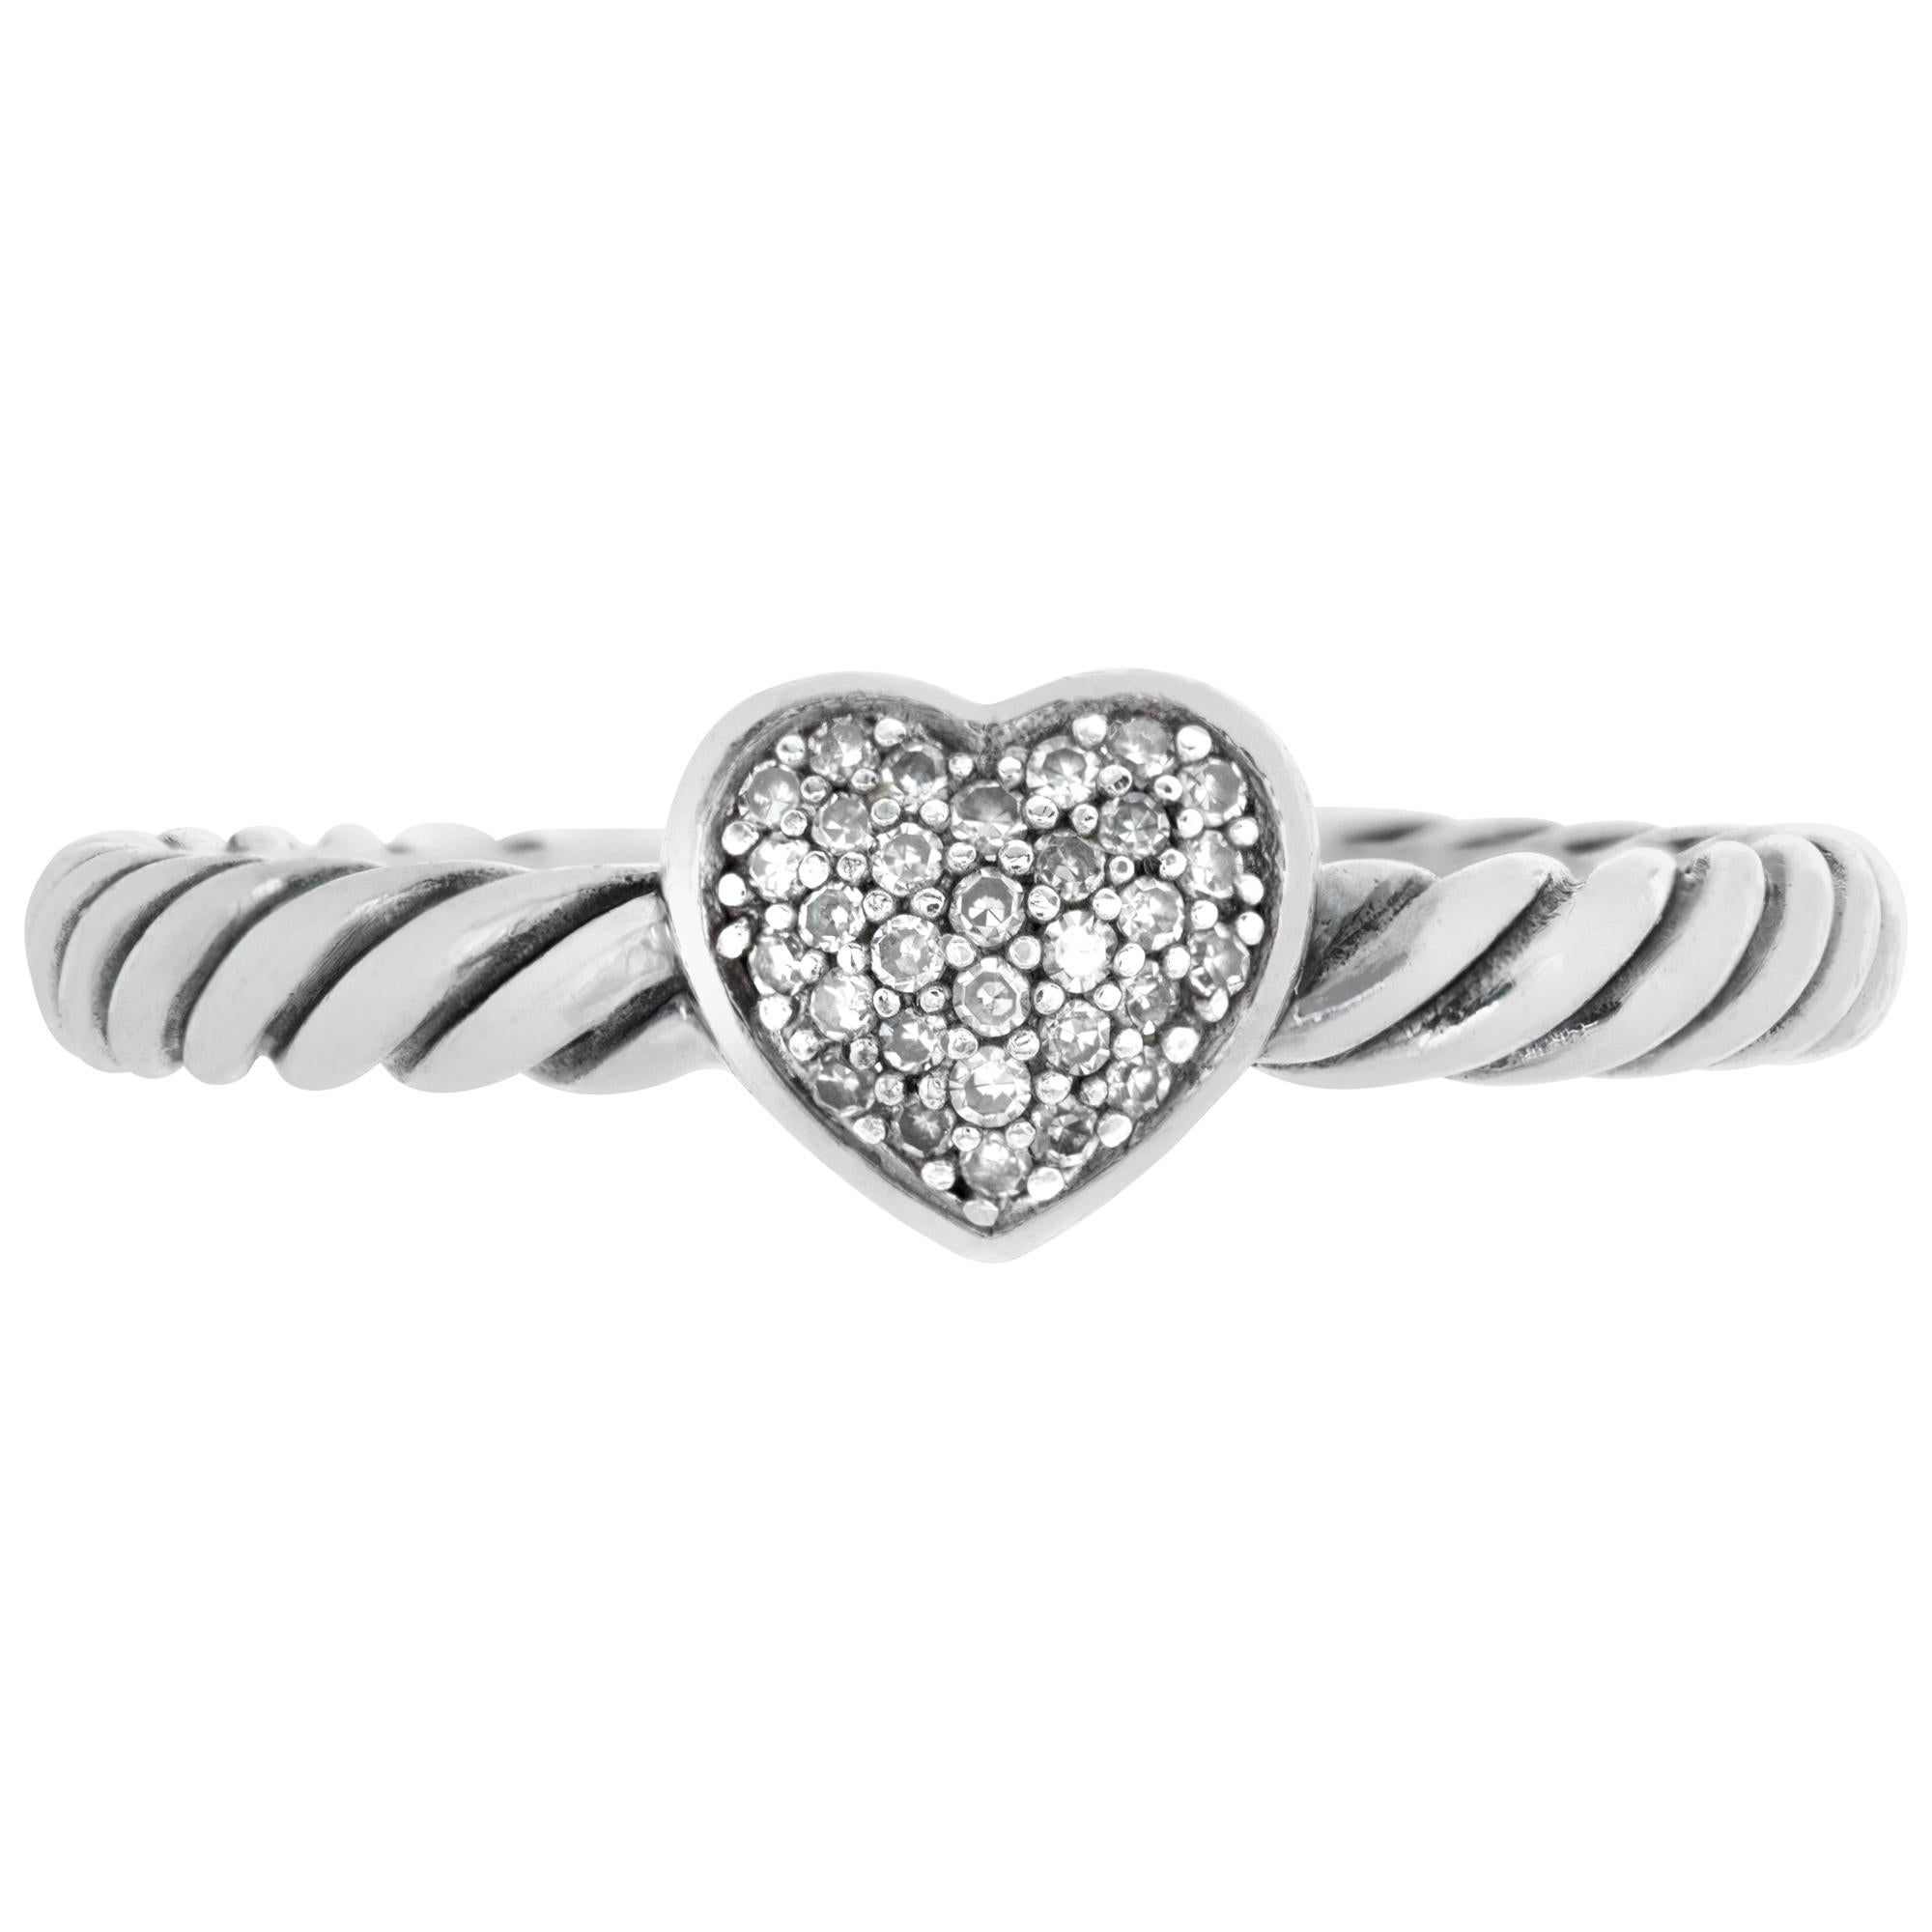 David Yurman diamond sterling silver petite pave heart ring. With original David Yurman box. Size 4.75

This David Yurman ring is currently size 4.75 and some items can be sized up or down, please ask! It weighs 1.2 pennyweights and is Sterling